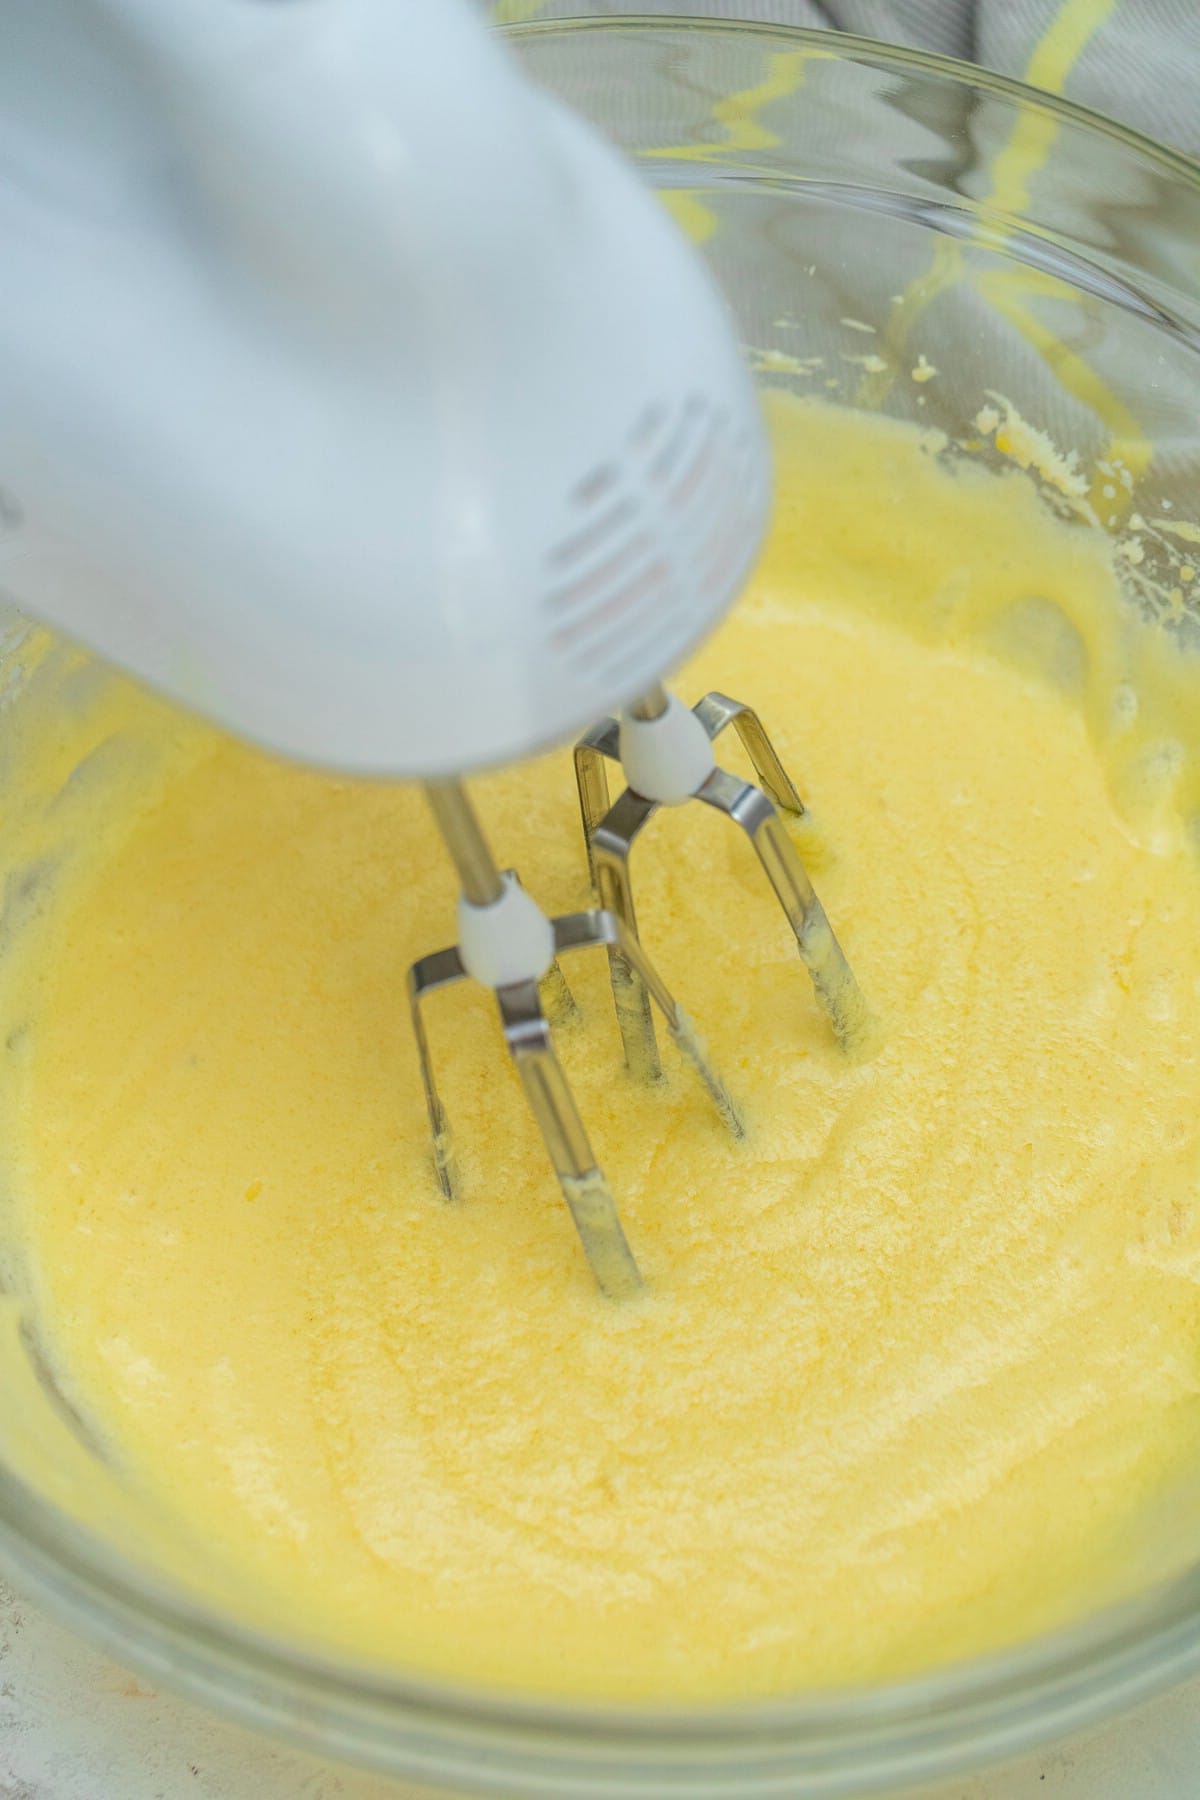 Mixer in bowl with butter and sugar mixture